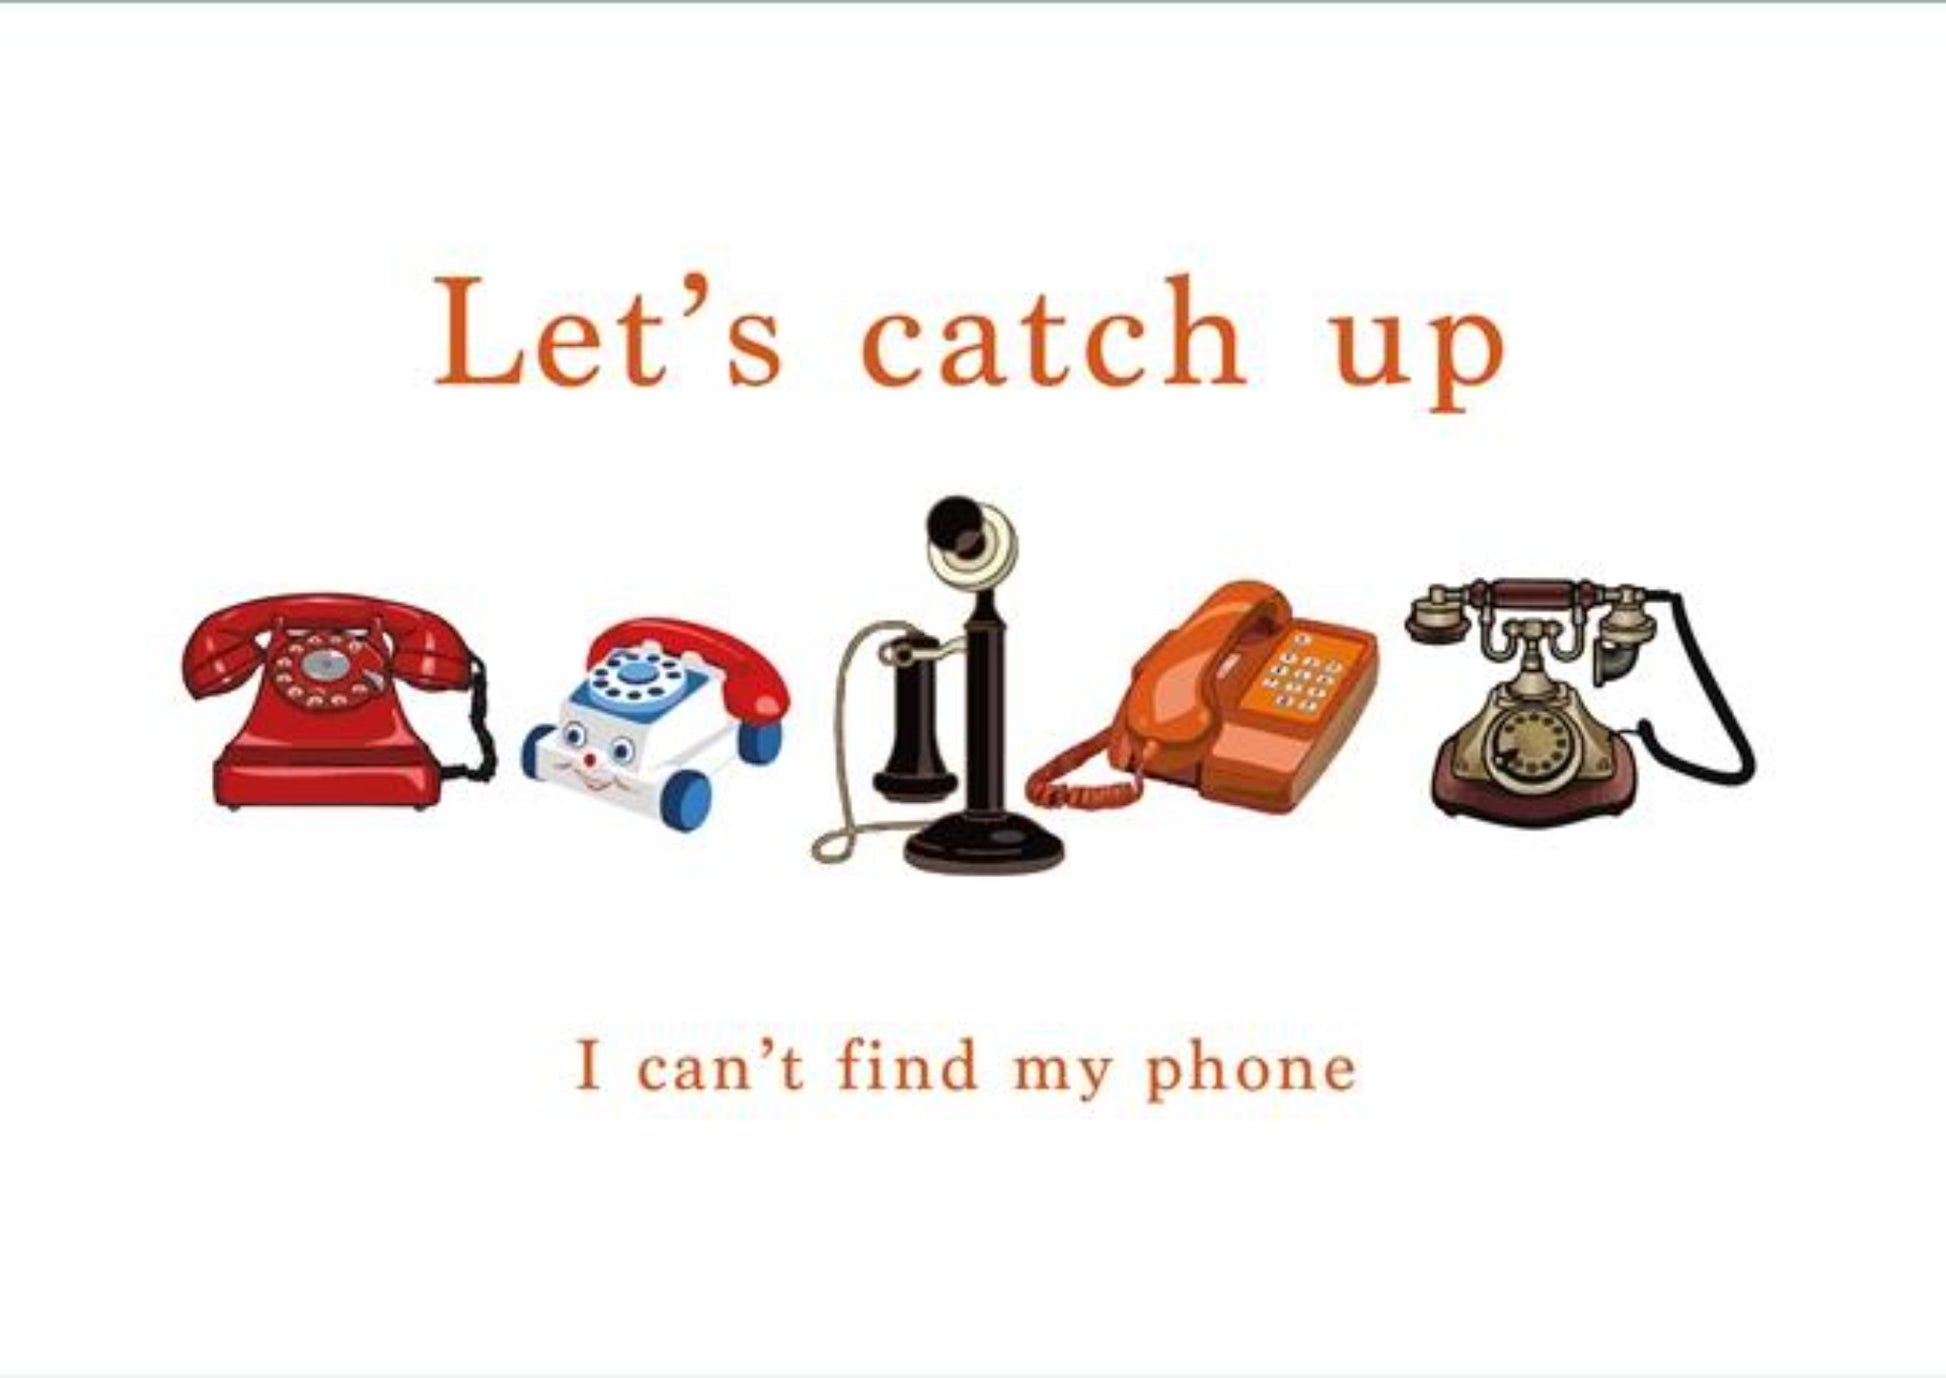 Let's Catch Up - Telephone Over The Years - Thinking Of You Greeting Card.